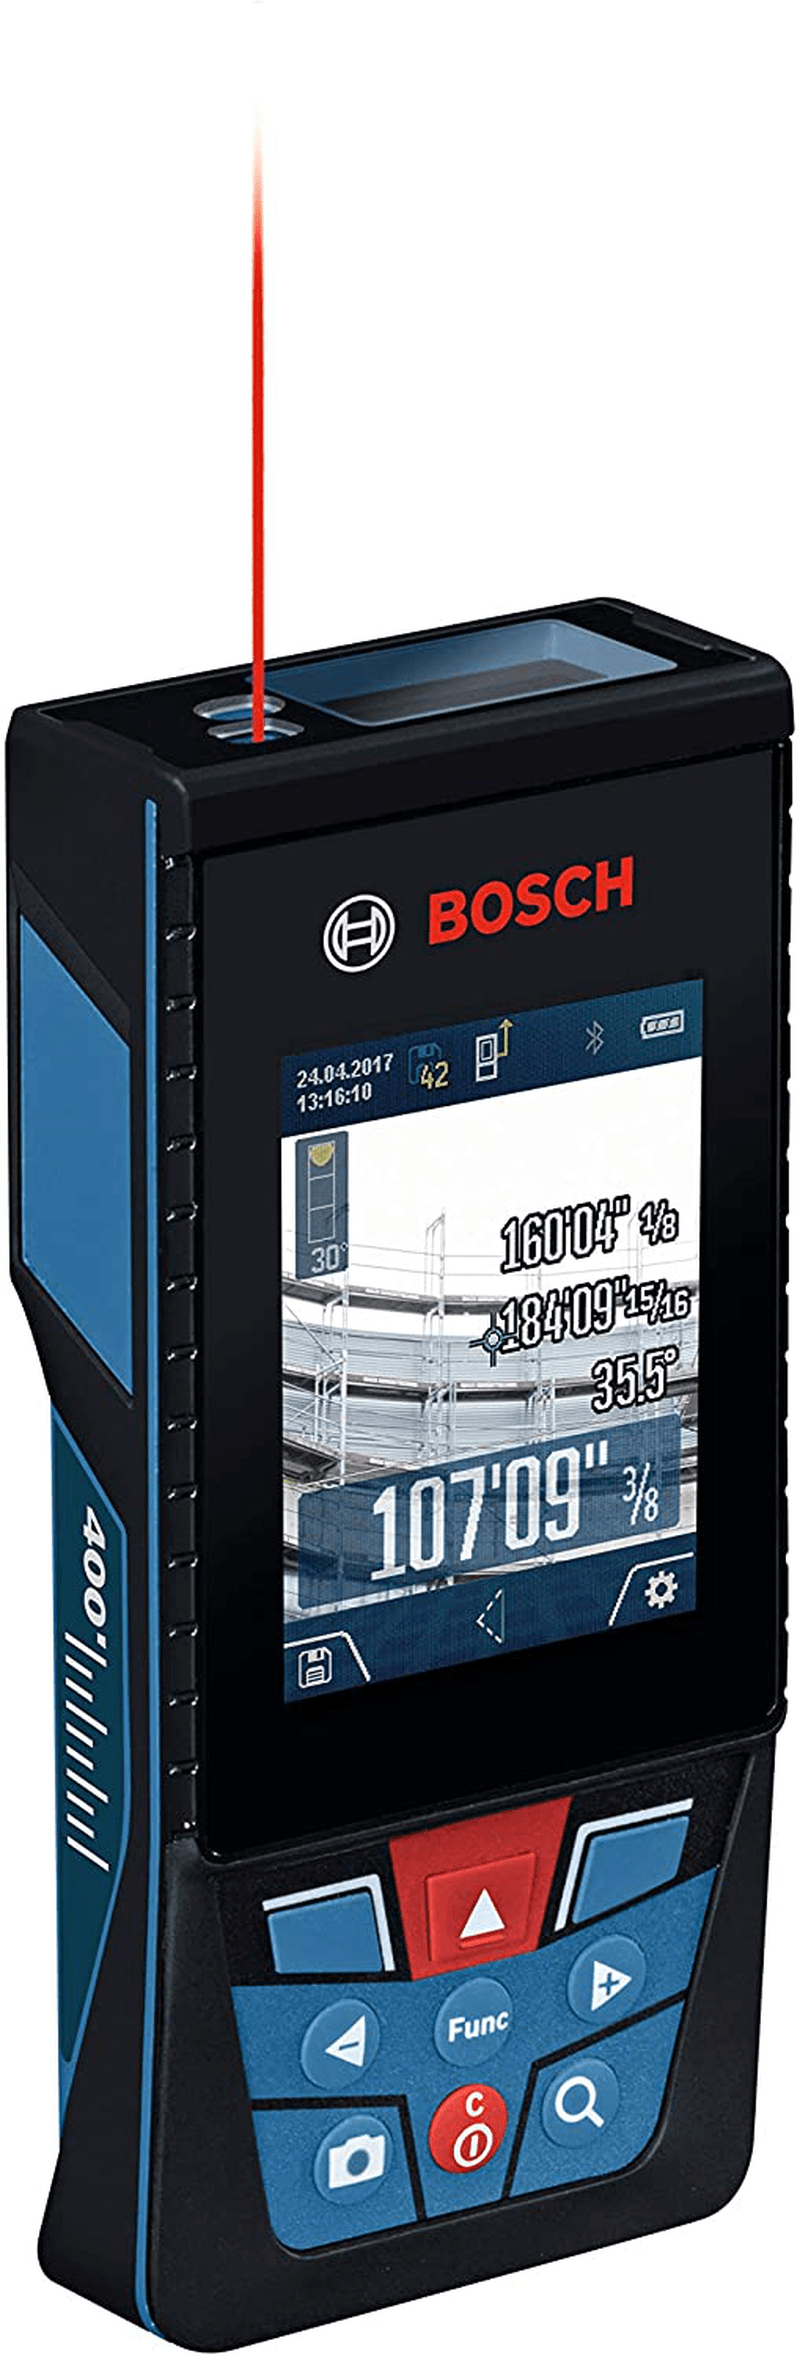 Bosch GLM400CL Blaze Outdoor 400ft Bluetooth Connected Laser Measure with Camera & Lithium-Ion Battery Hardware > Tools > Measuring Tools & Sensors BOSCH Default Title  